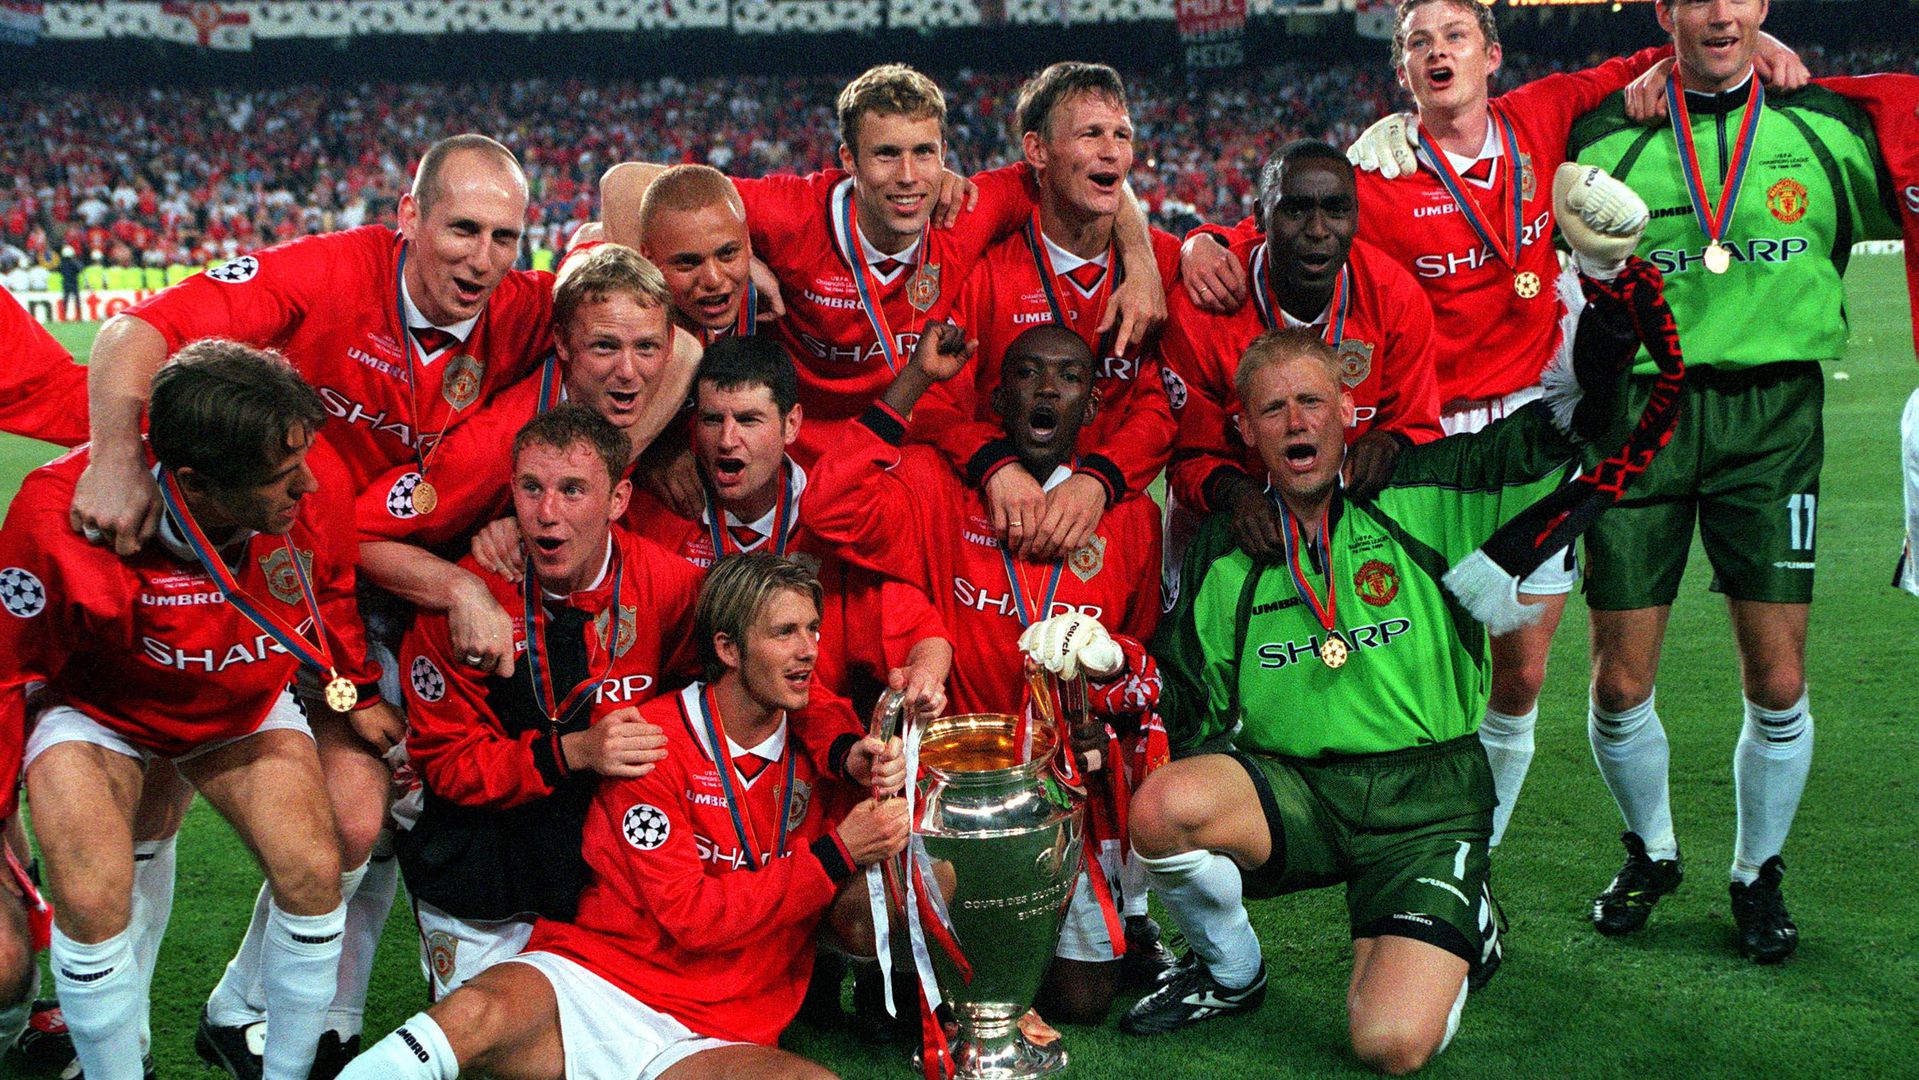 Celebrate the '99 Treble with the 2019/20 Manchester United home kit